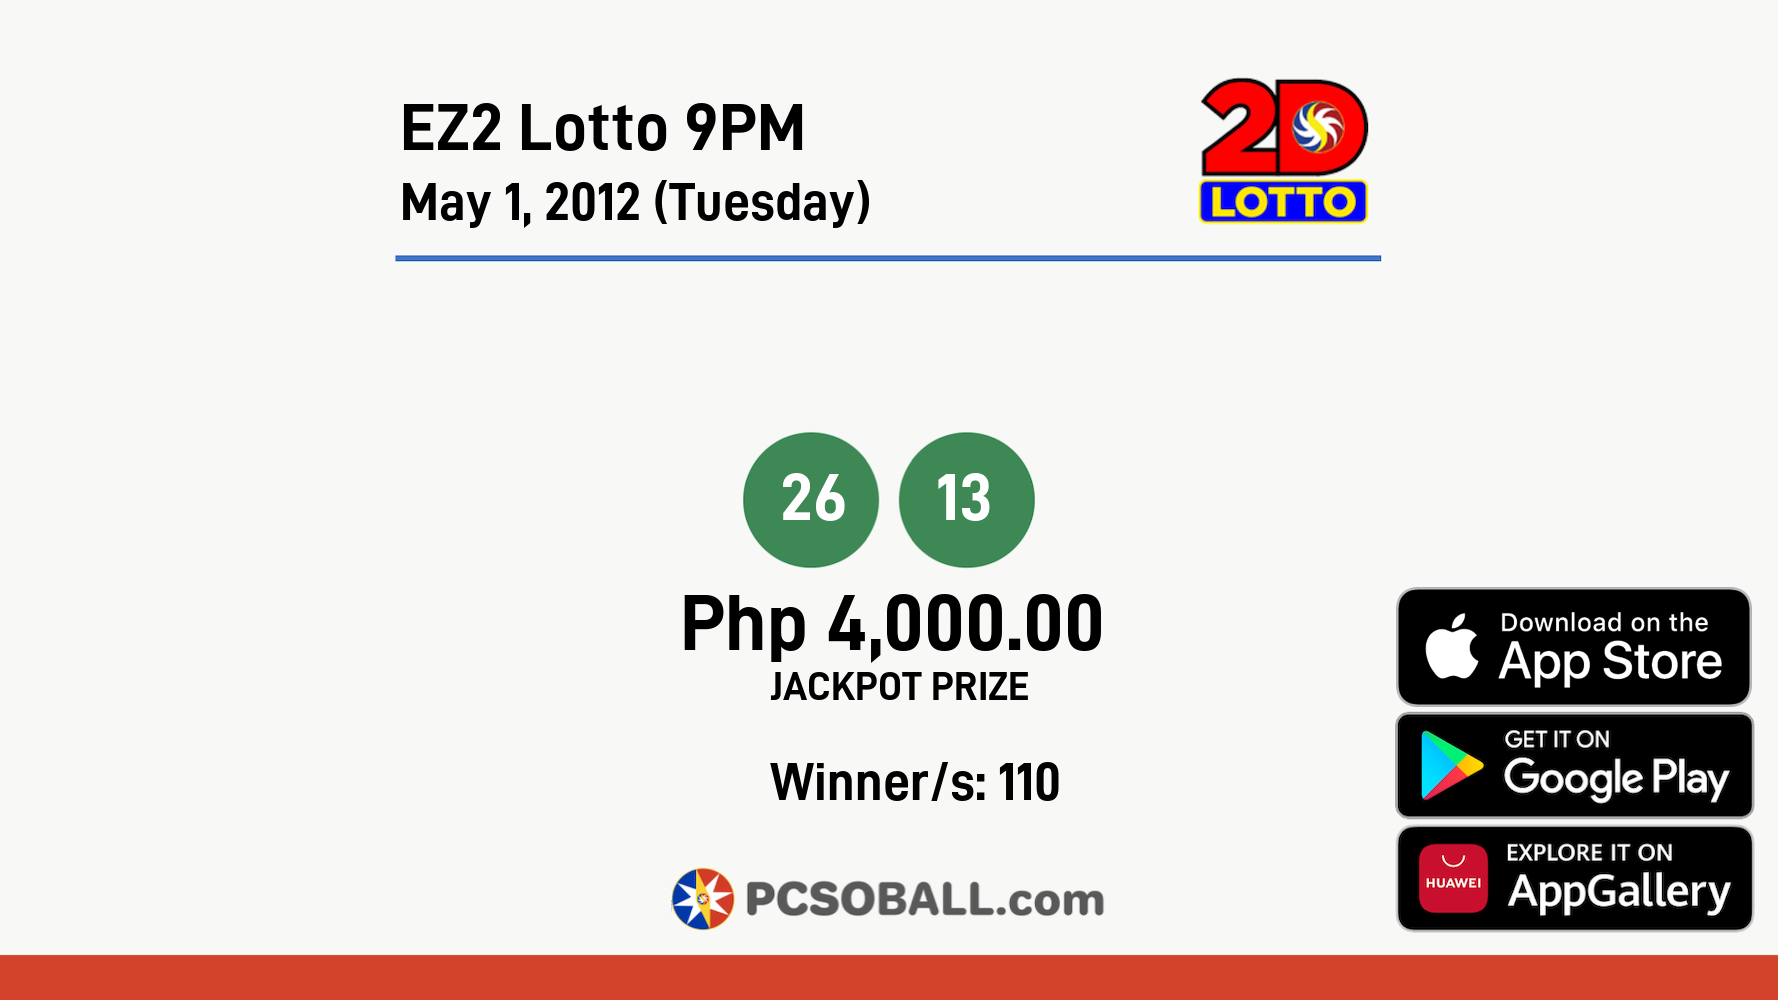 EZ2 Lotto 9PM May 1, 2012 (Tuesday) Result